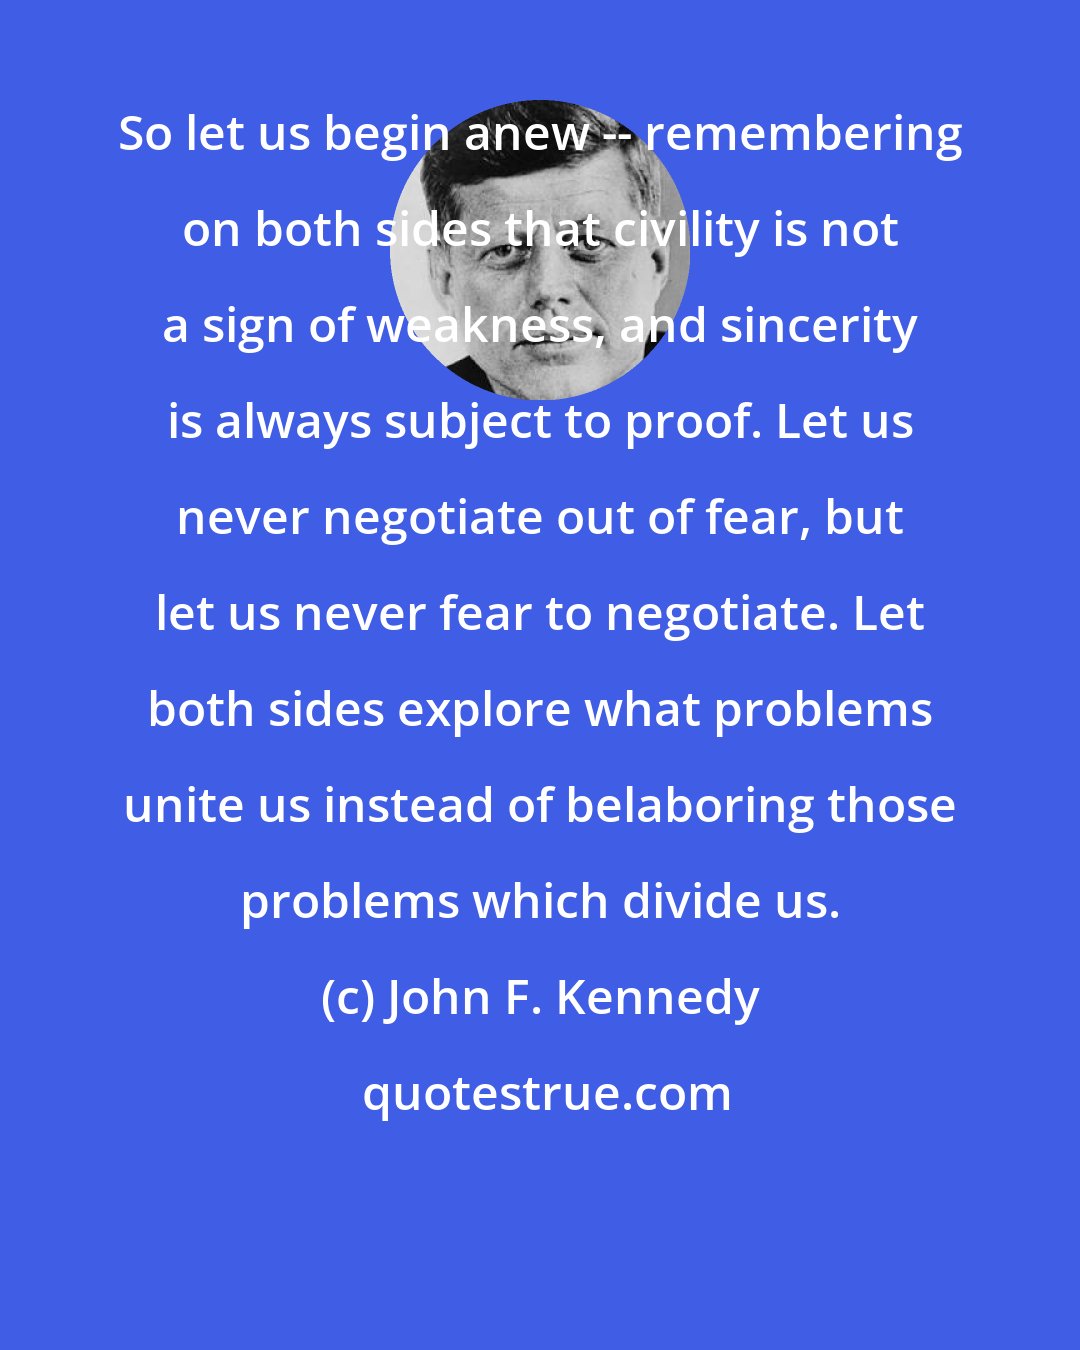 John F. Kennedy: So let us begin anew -- remembering on both sides that civility is not a sign of weakness, and sincerity is always subject to proof. Let us never negotiate out of fear, but let us never fear to negotiate. Let both sides explore what problems unite us instead of belaboring those problems which divide us.